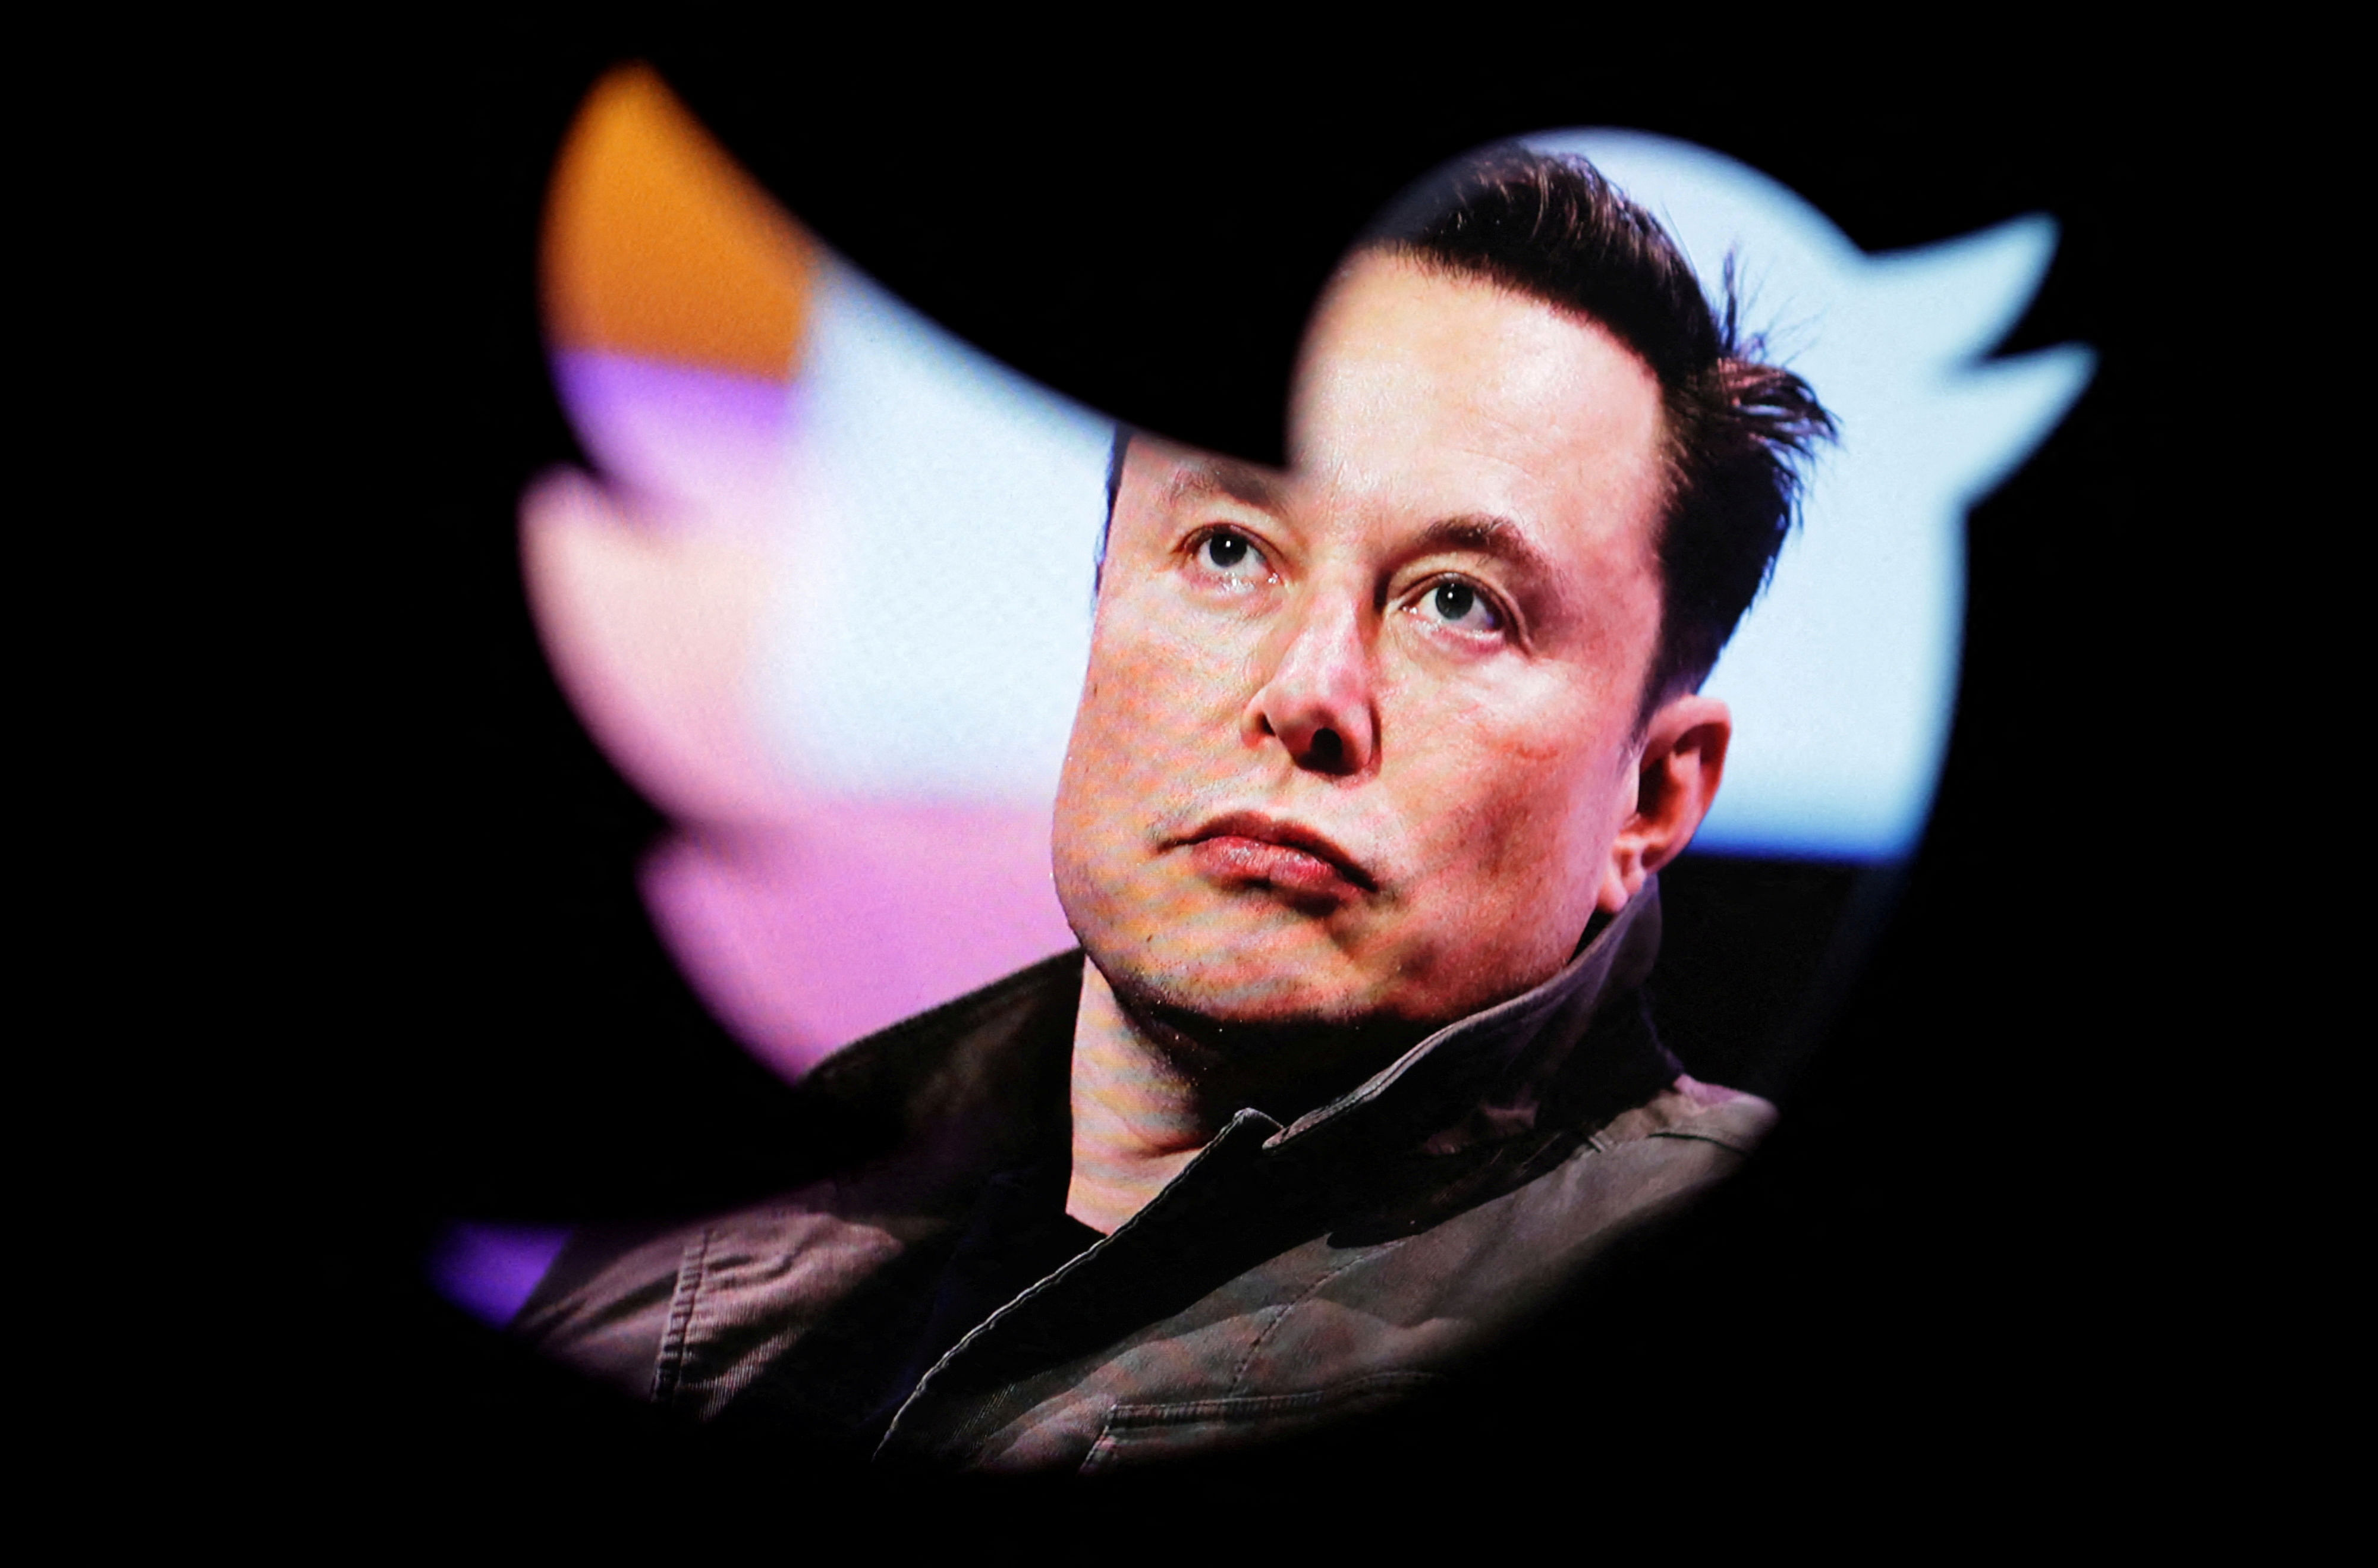 Elon Musk's photo is seen through a Twitter logo in this illustration. Credit: Reuters File Photo